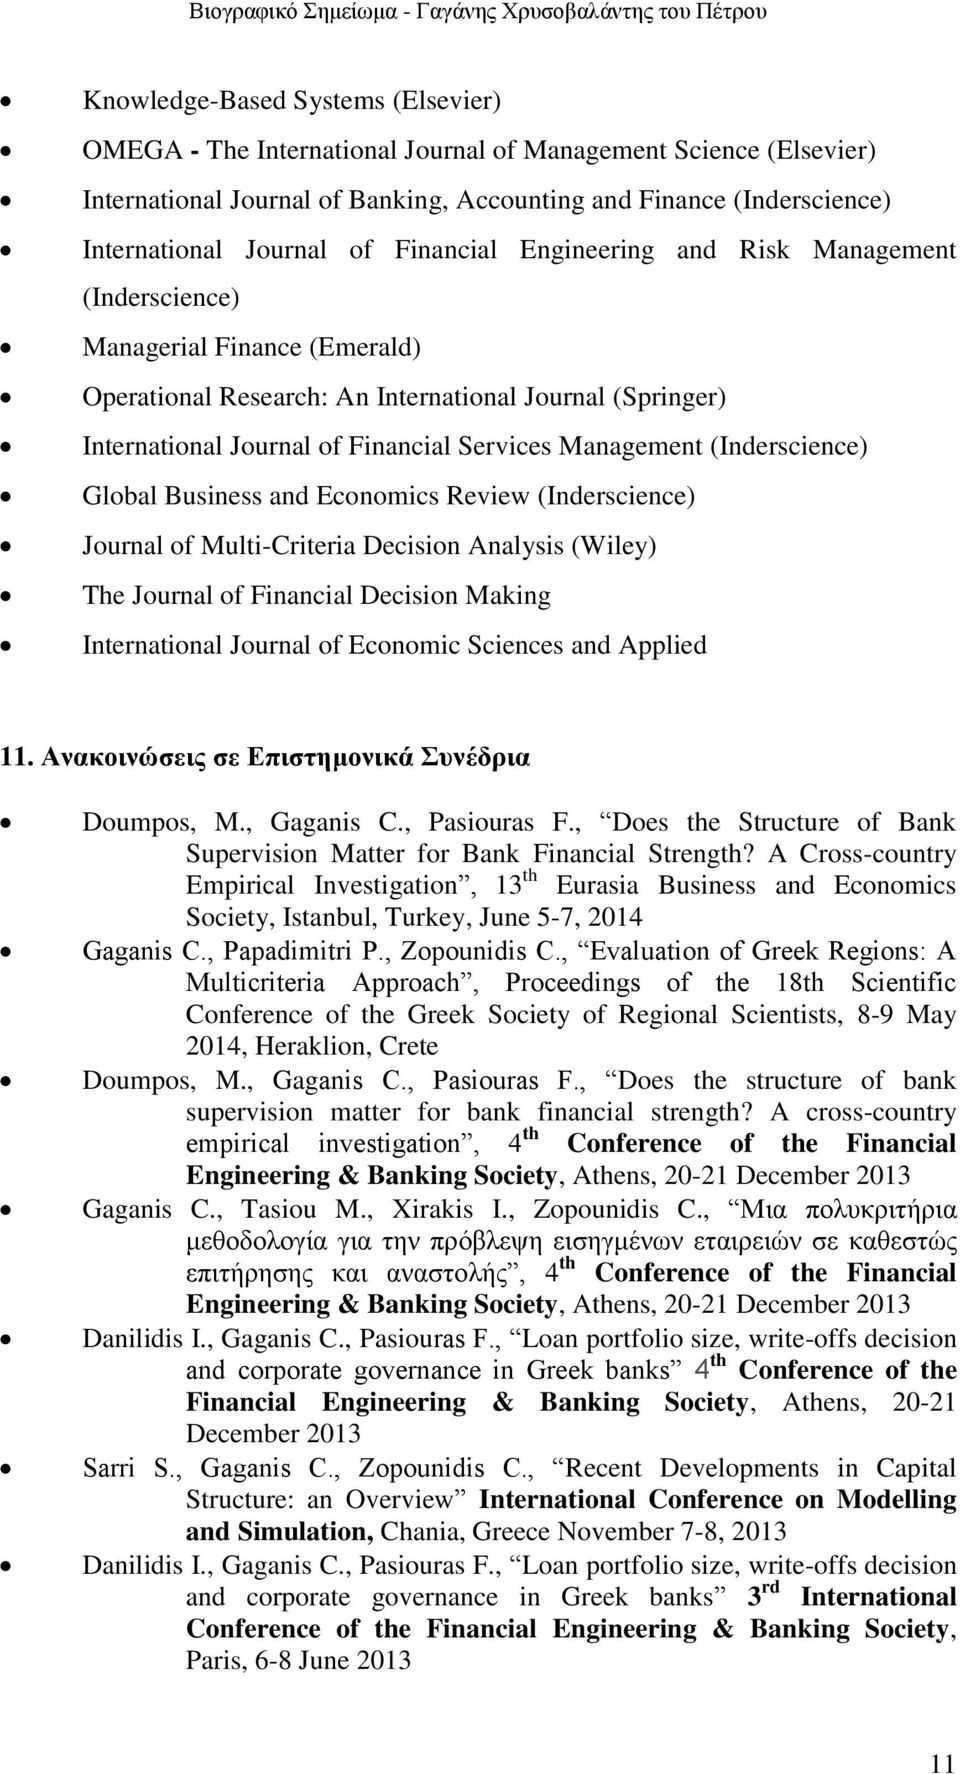 (Inderscience) Global Business and Economics Review (Inderscience) Journal of Multi-Criteria Decision Analysis (Wiley) The Journal of Financial Decision Making International Journal of Economic